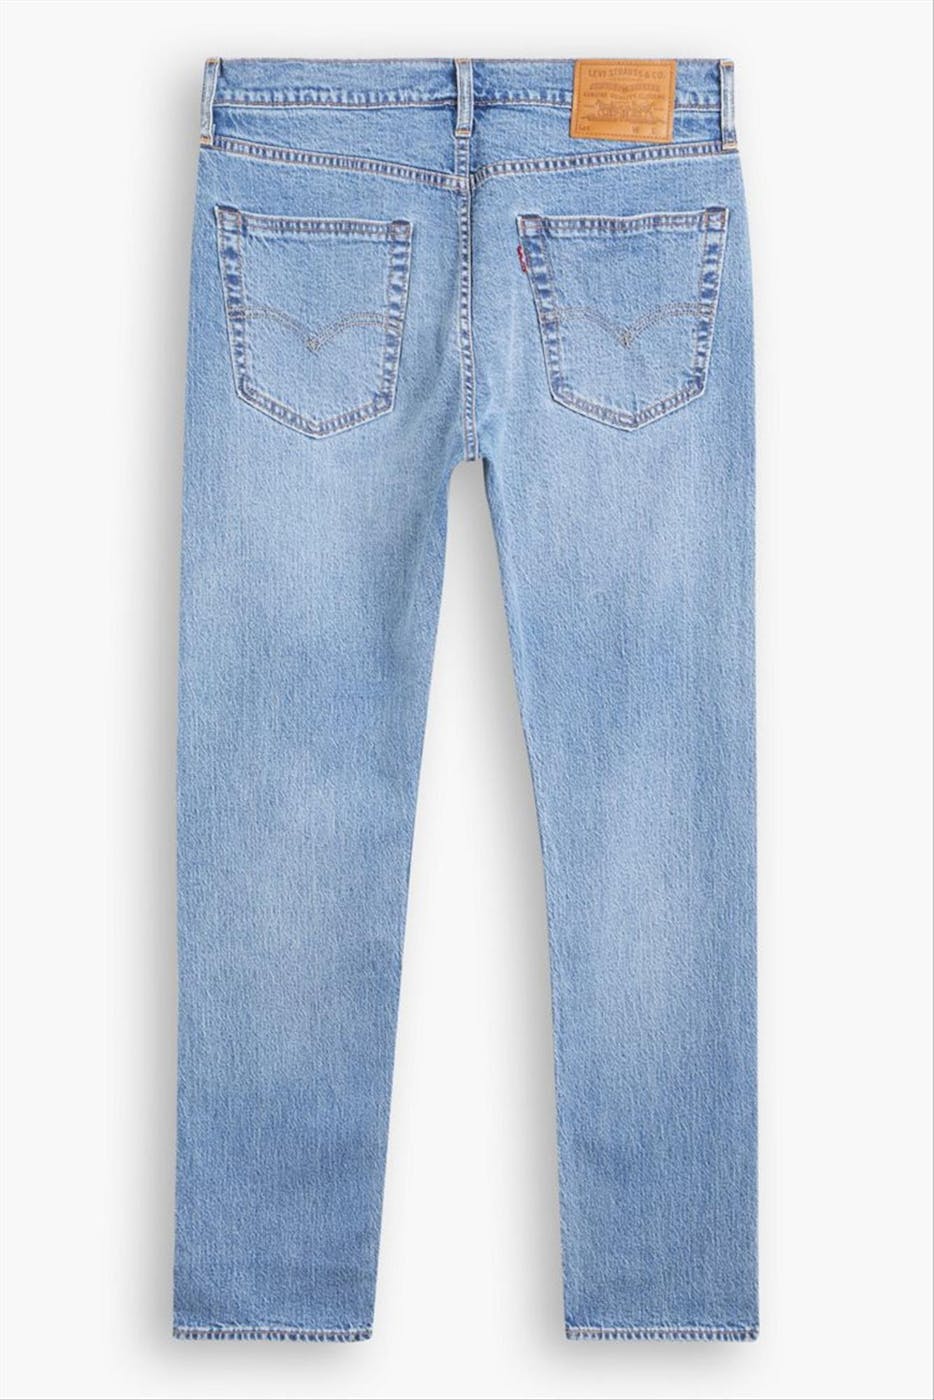 Levi's - Lichtblauwe 502 Tapered jeans